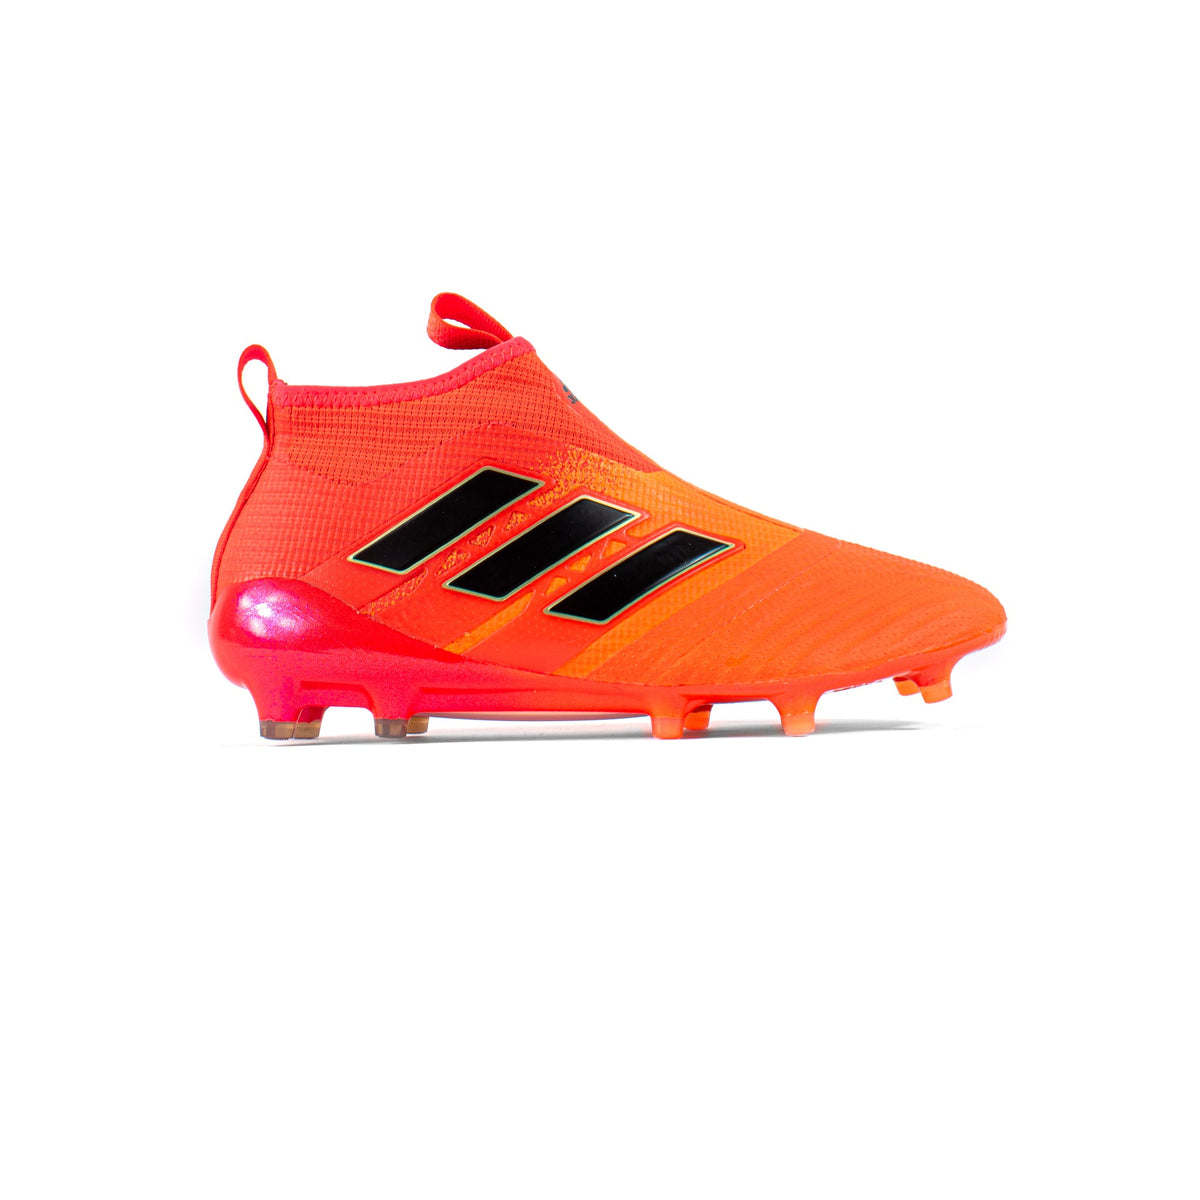 Adidas Ace 17+ PureControl Red FG – Classic Cleats